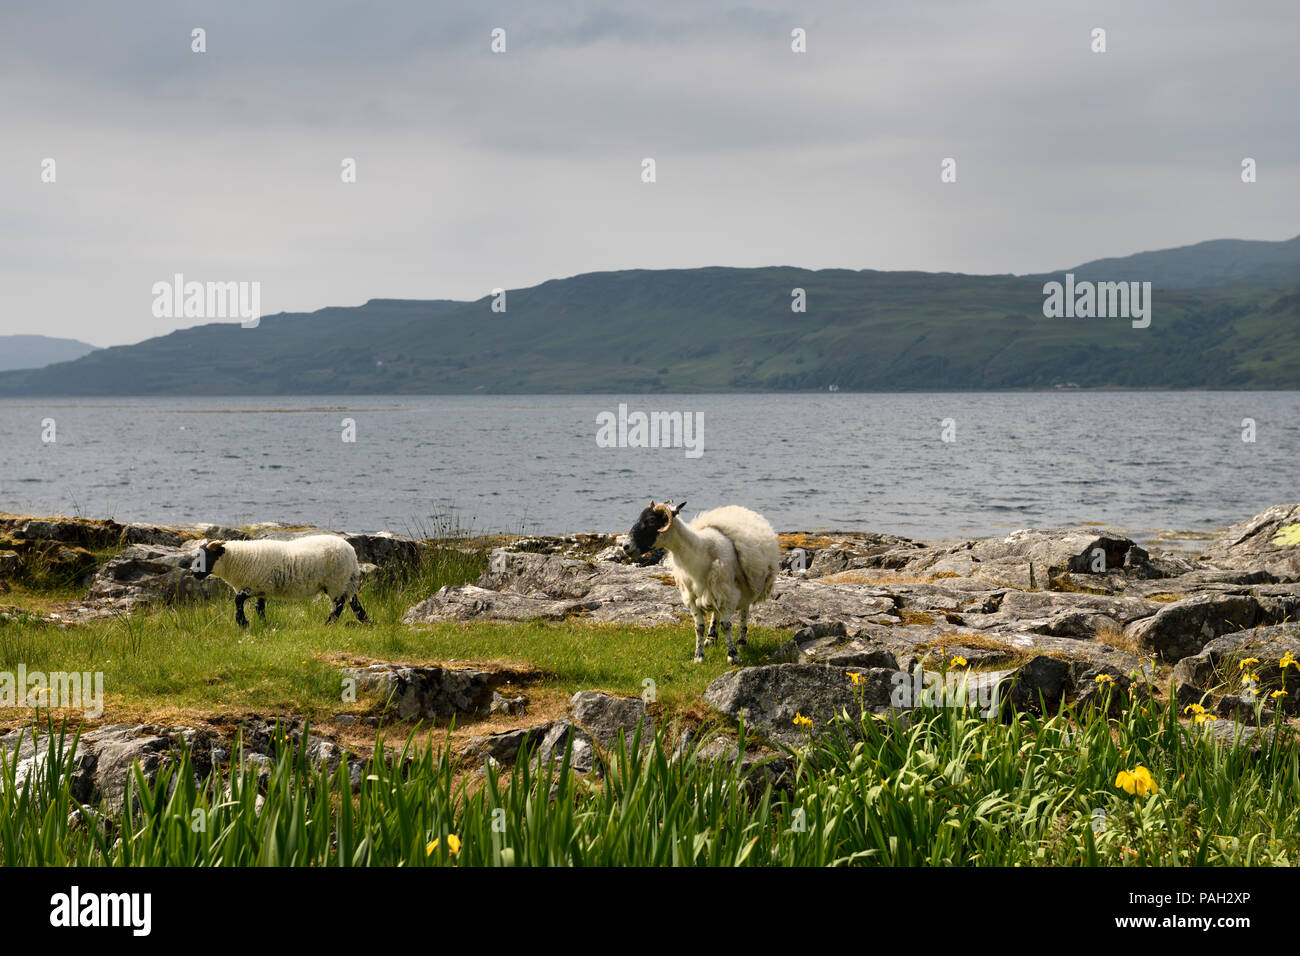 Scottish Blackface sheep lamb and mother shedding fleece at the shore of Lach Na Keal on Isle of Mull Scotland UK with yellow flag Iris flowers Stock Photo